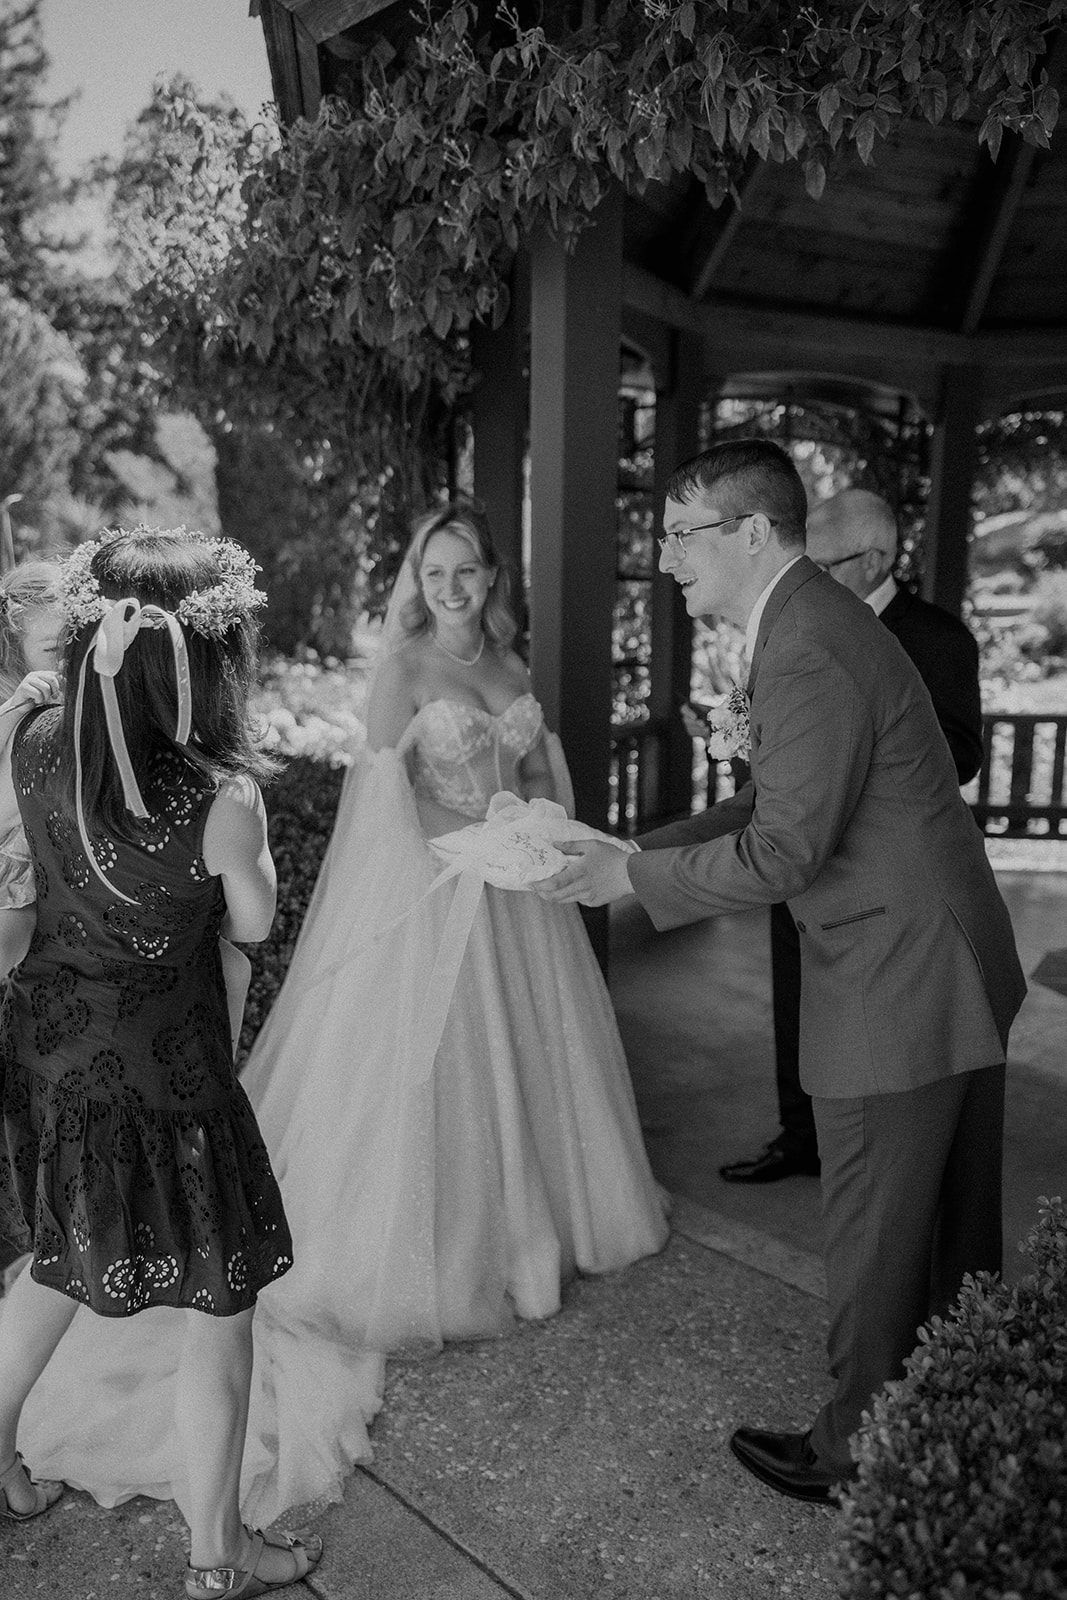 A bride and groom stand facing each other during an outdoor wedding ceremony. The bride wears an off-shoulder gown with a long train, and the groom wears a gray suit. They are surrounded by greenery at their wedding at the gardens at heather farms